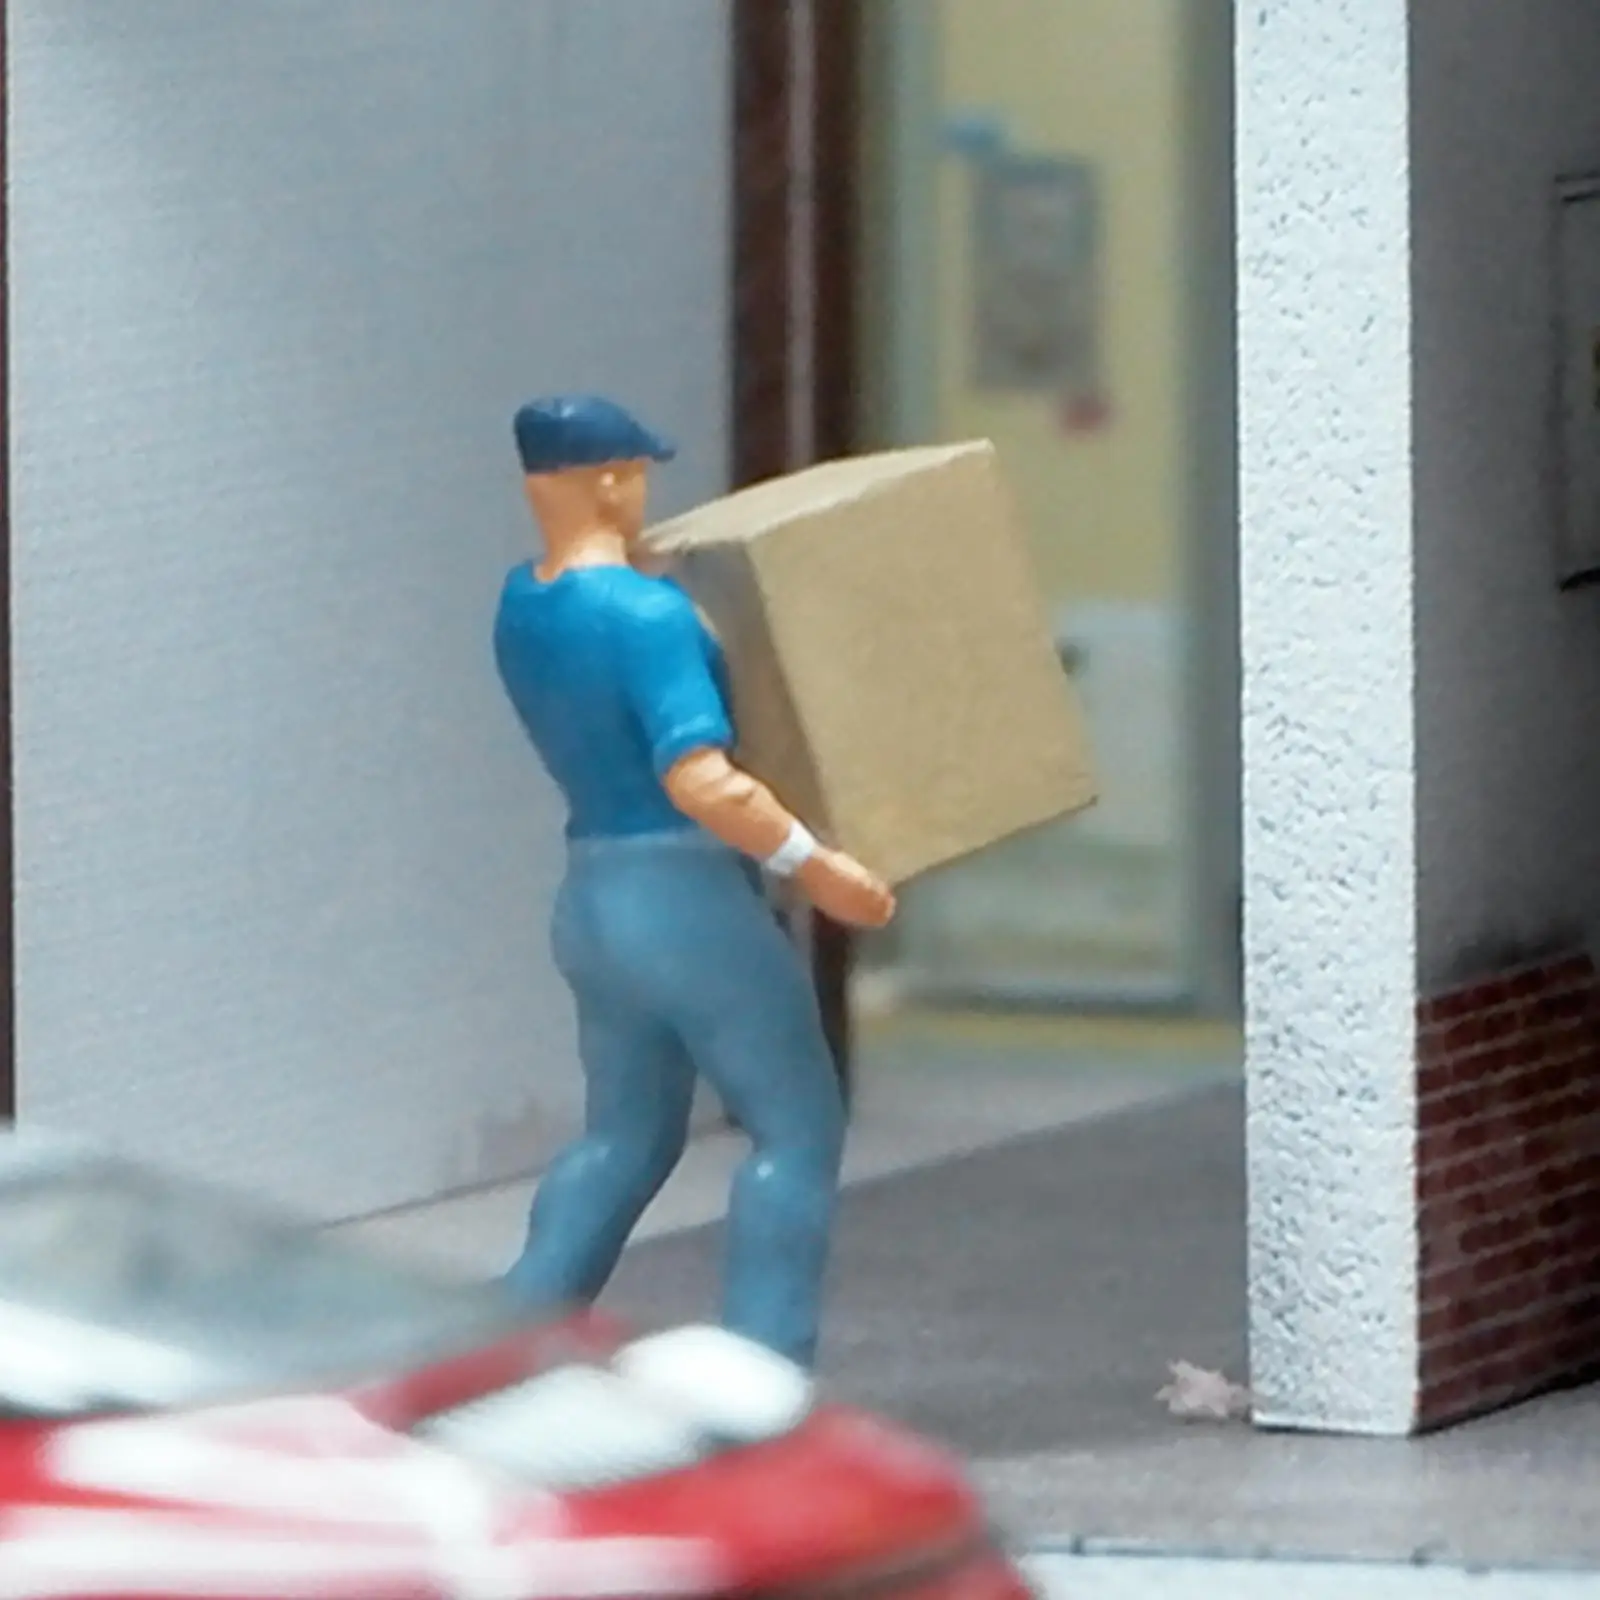 1/64 Delivery Man Model Porter People Figurine Character Model for Micro Landscape